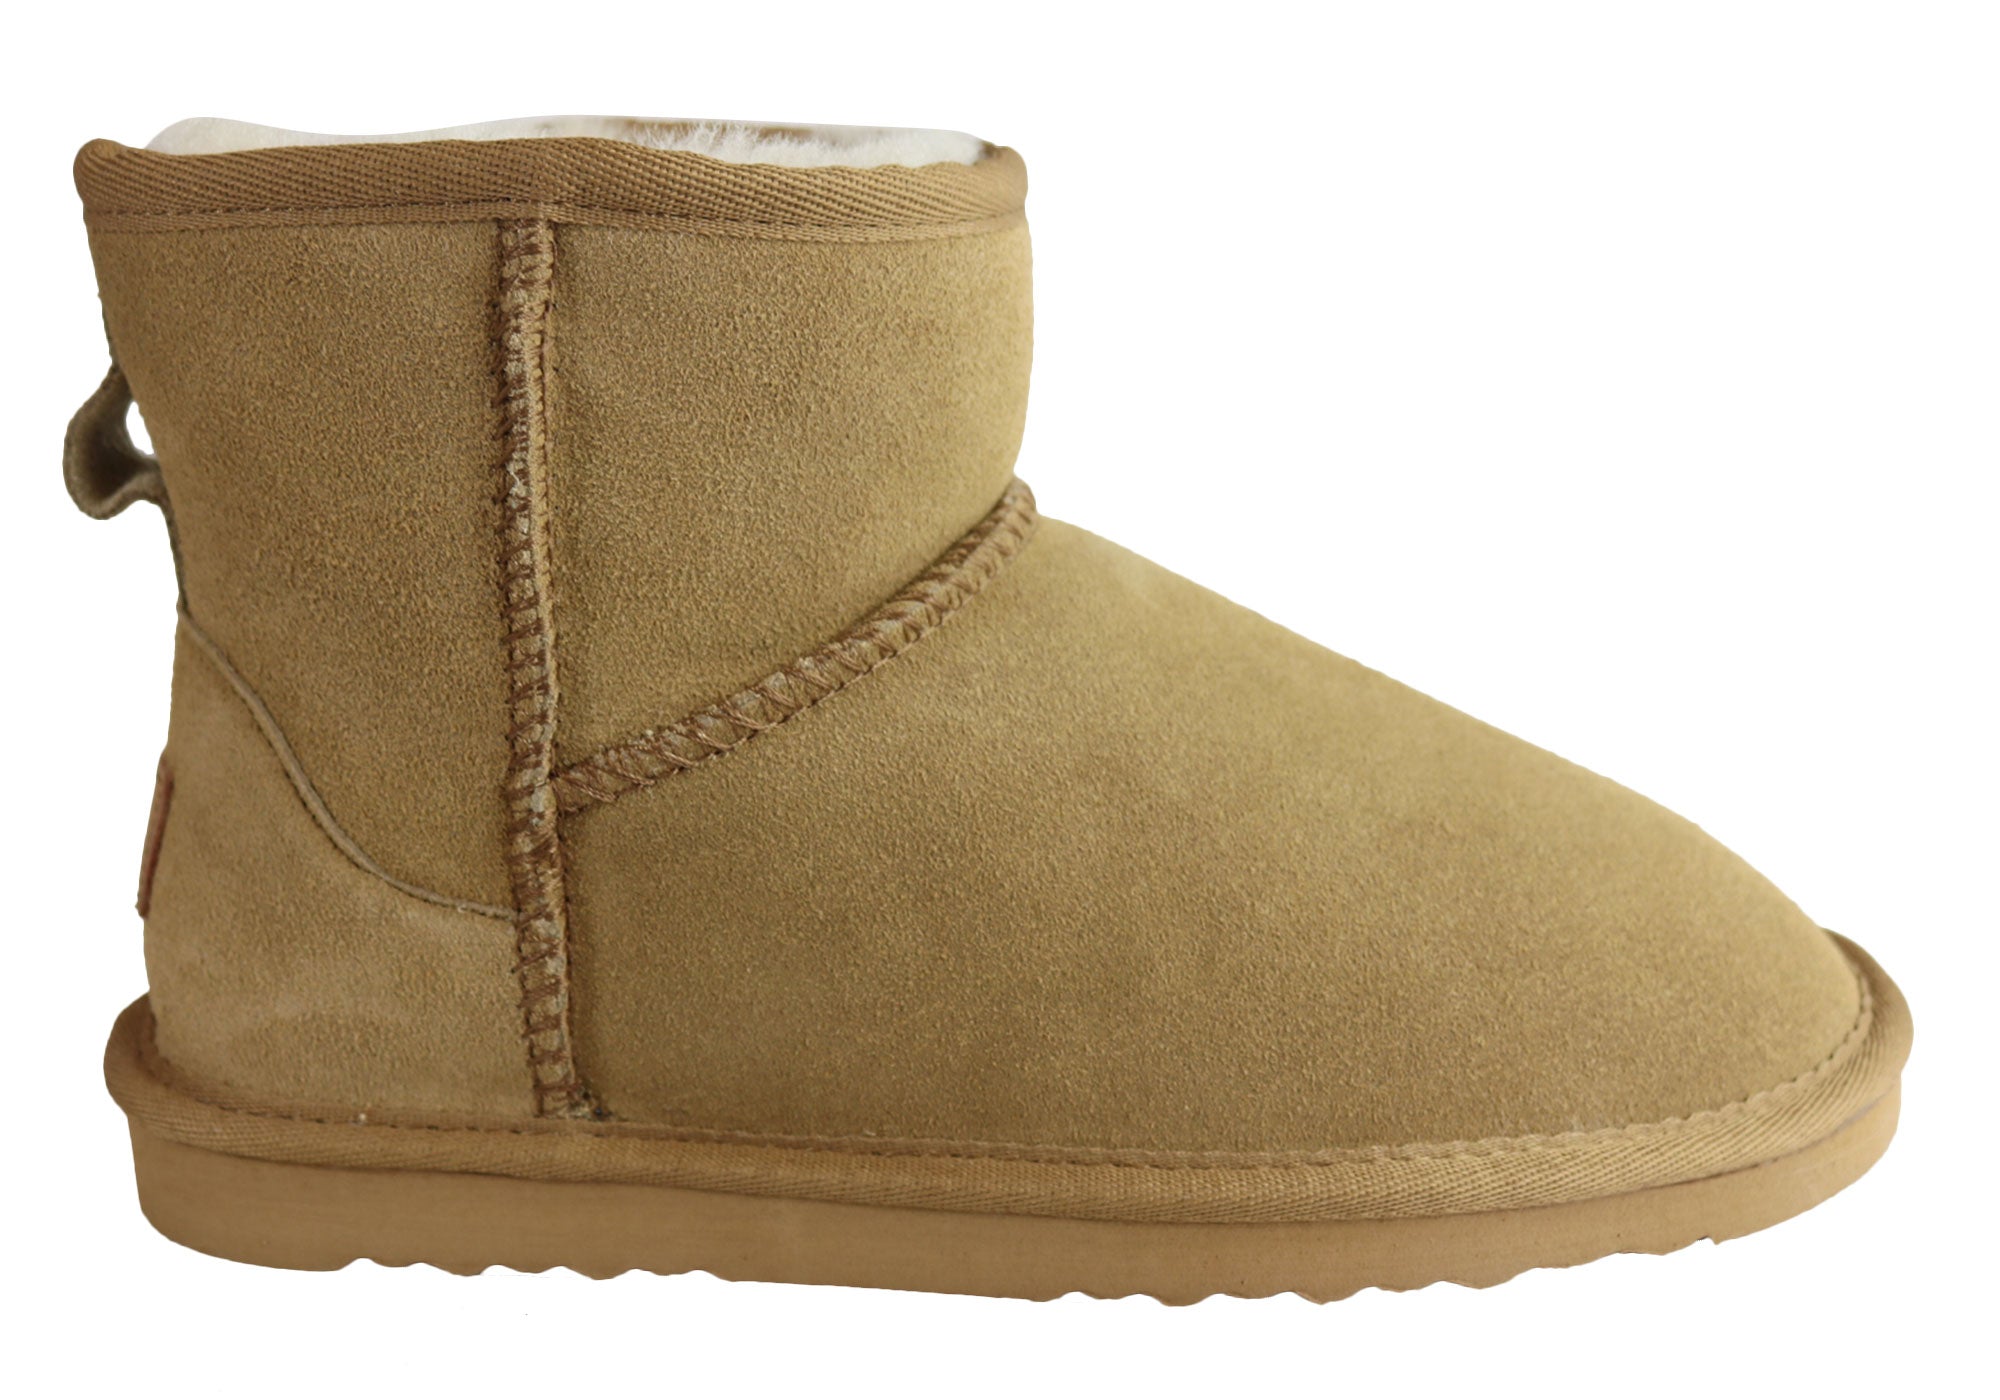 the new ugg boots